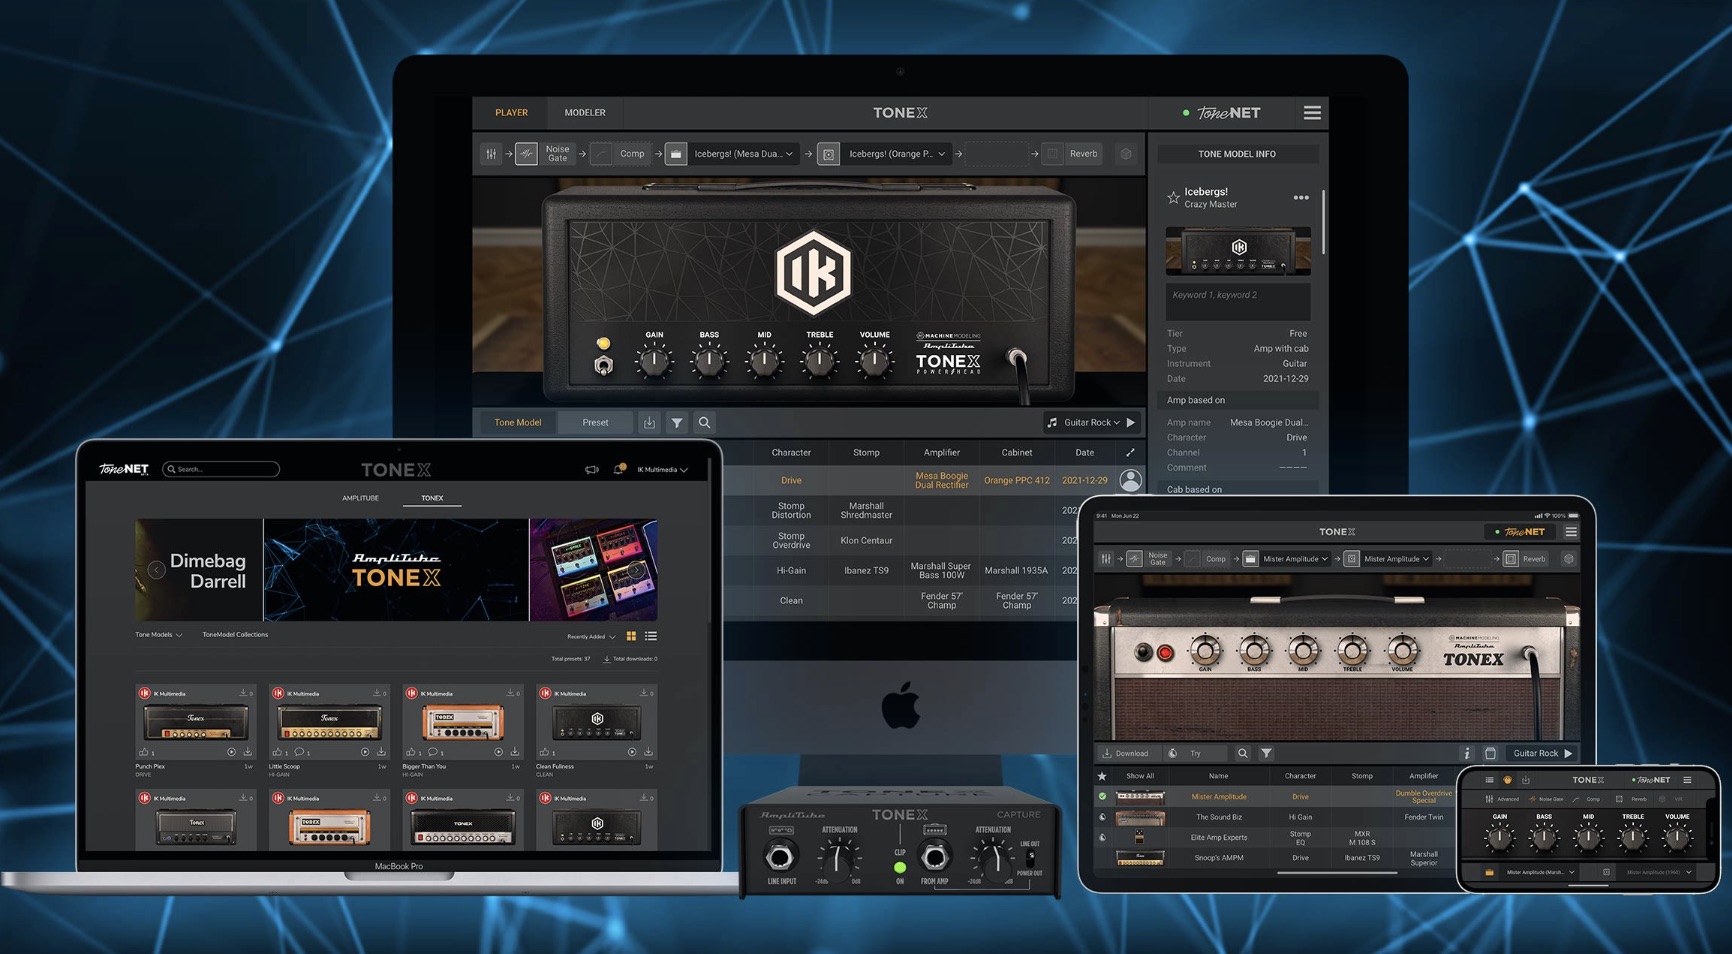 Model your gear and turn it into a plugin with IK Multimedia’s new AmpliTube Tonex software